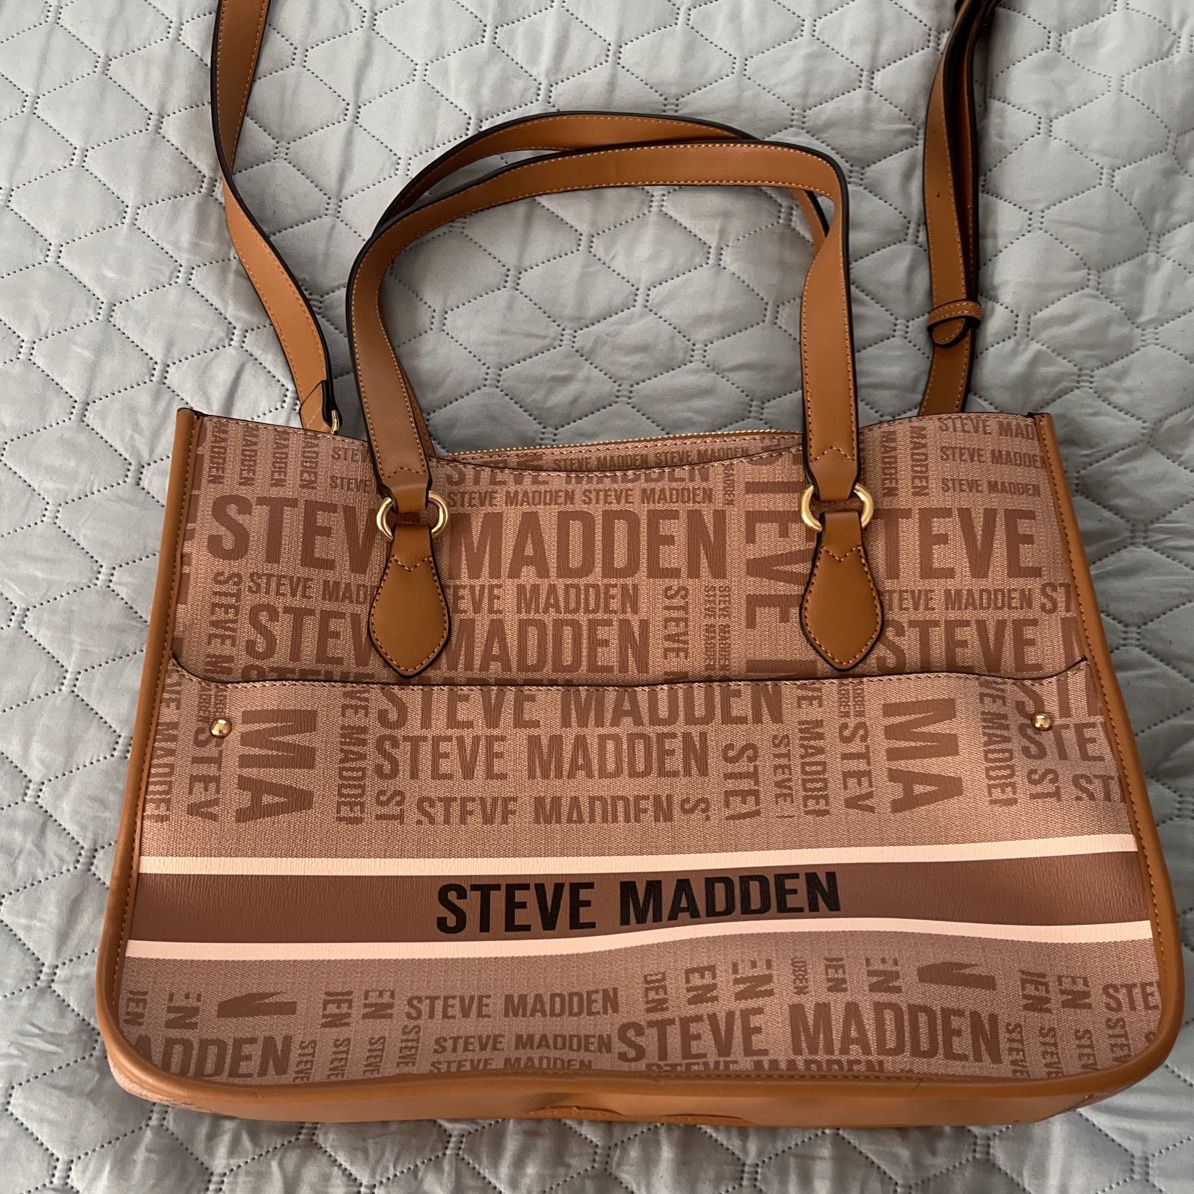 Steve Madden Crossbody Purse for Sale in Port St. Lucie, FL - OfferUp